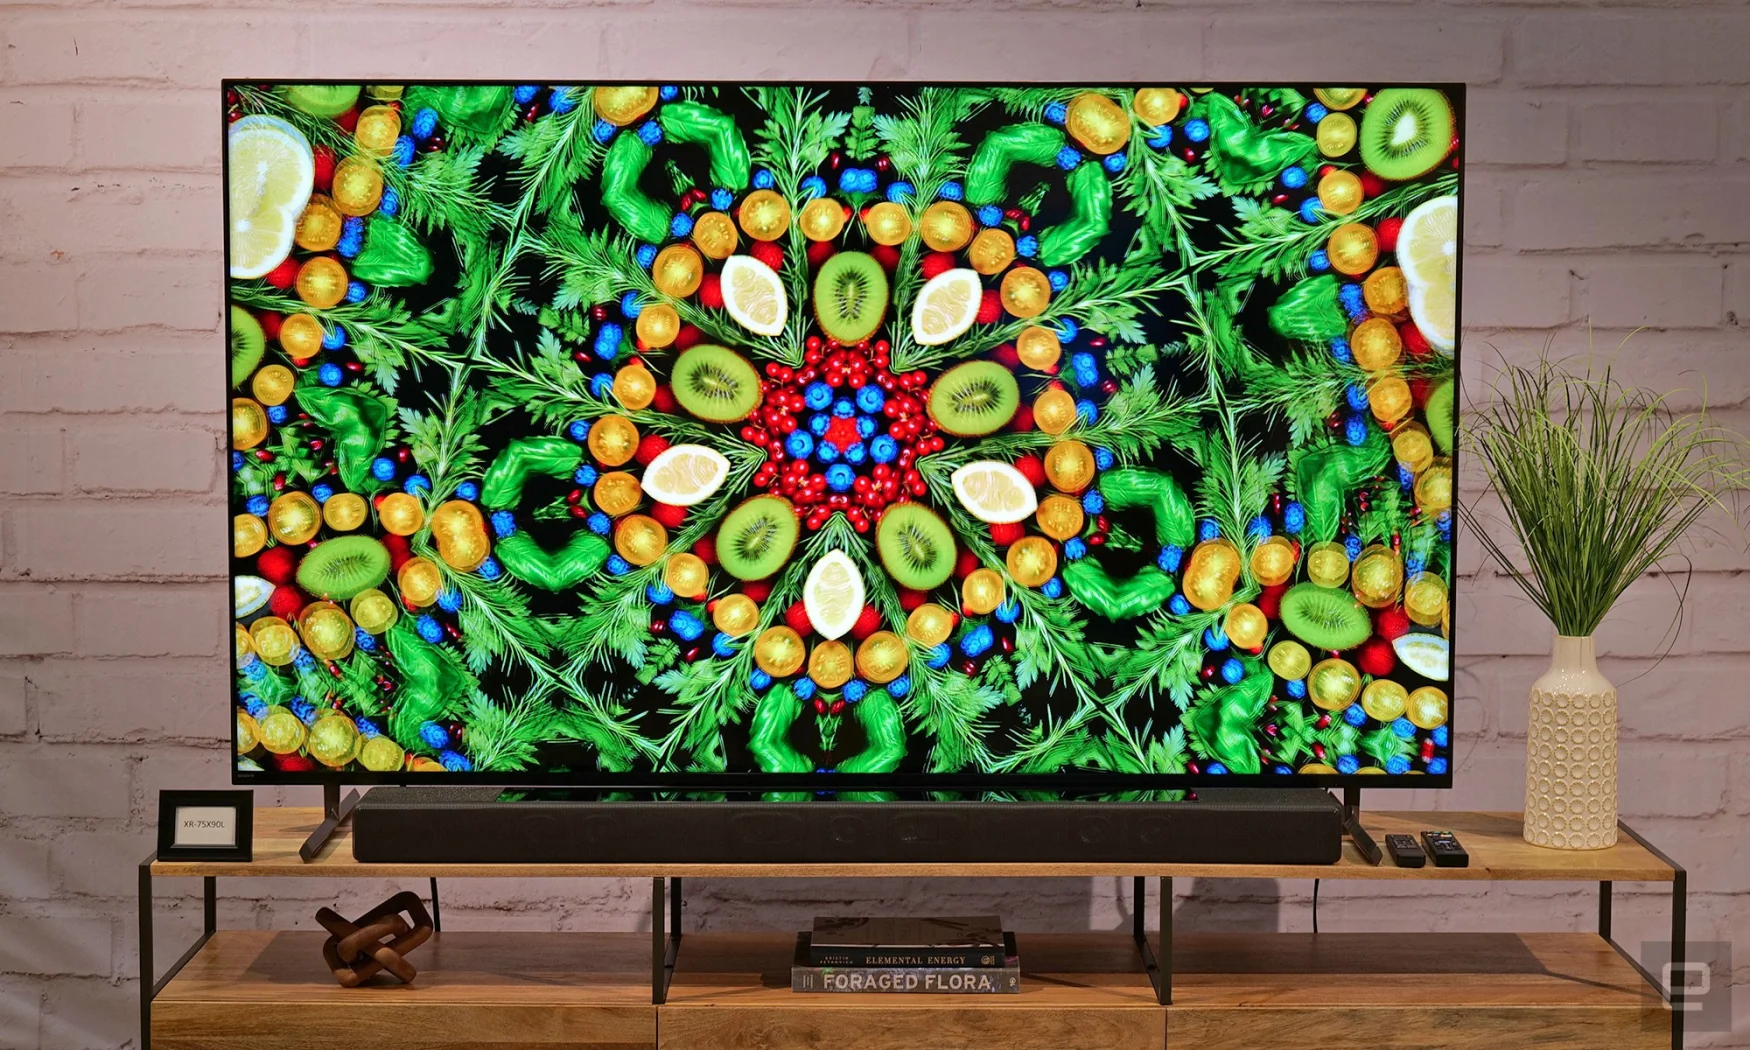 While it's a mid-range TV overall, the new X90L is poised to be the entry model in Sony's high-end Bravia XR TV family. And with the largest model going up to 98 inches, it's also the largest. 